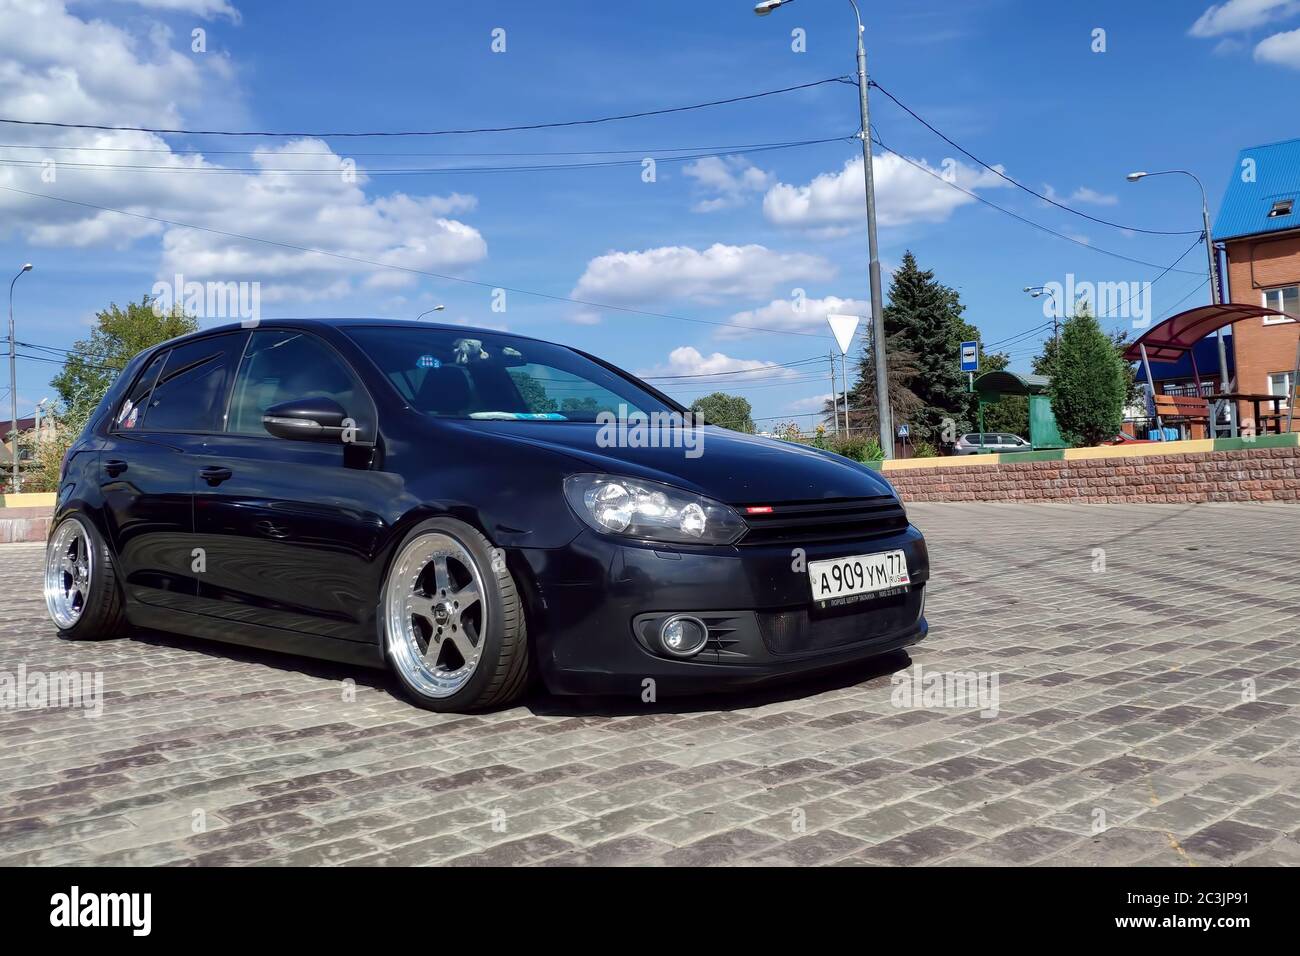 https://c8.alamy.com/comp/2C3JP91/moscow-russia-june-04-2019-tuned-and-understated-volkswagen-golf-6-black-air-suspension-and-custom-polished-alloy-wheels-parked-on-the-street-2C3JP91.jpg